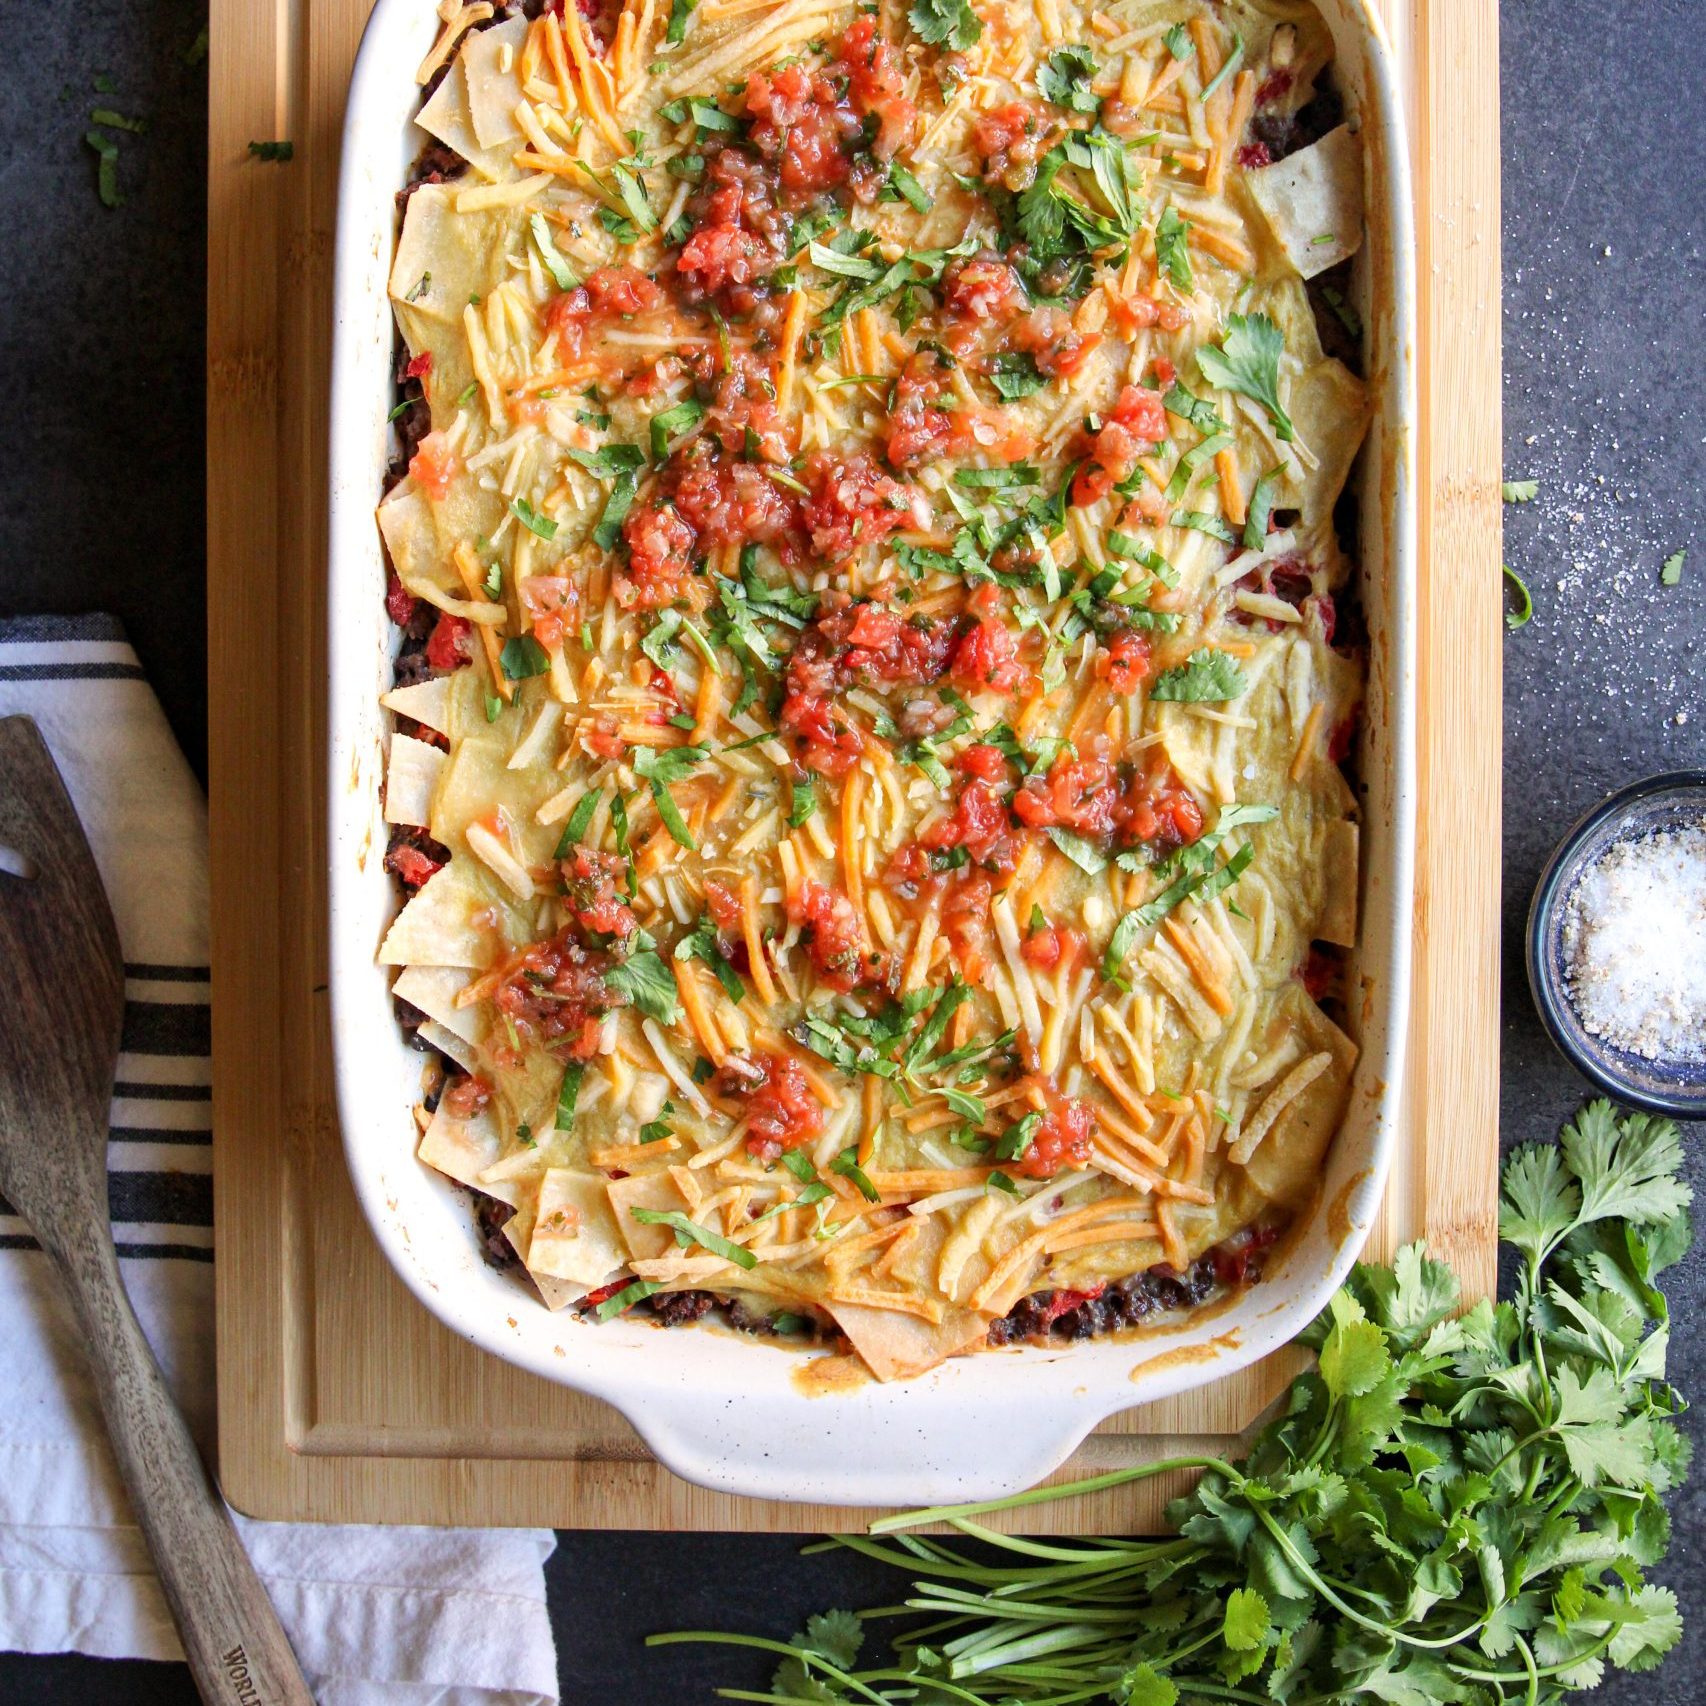 Mexican-inspired Lasagna - Gluten-free, dairy-free, with paleo option. Make as a casserole in the oven or in a skillet on the stove!